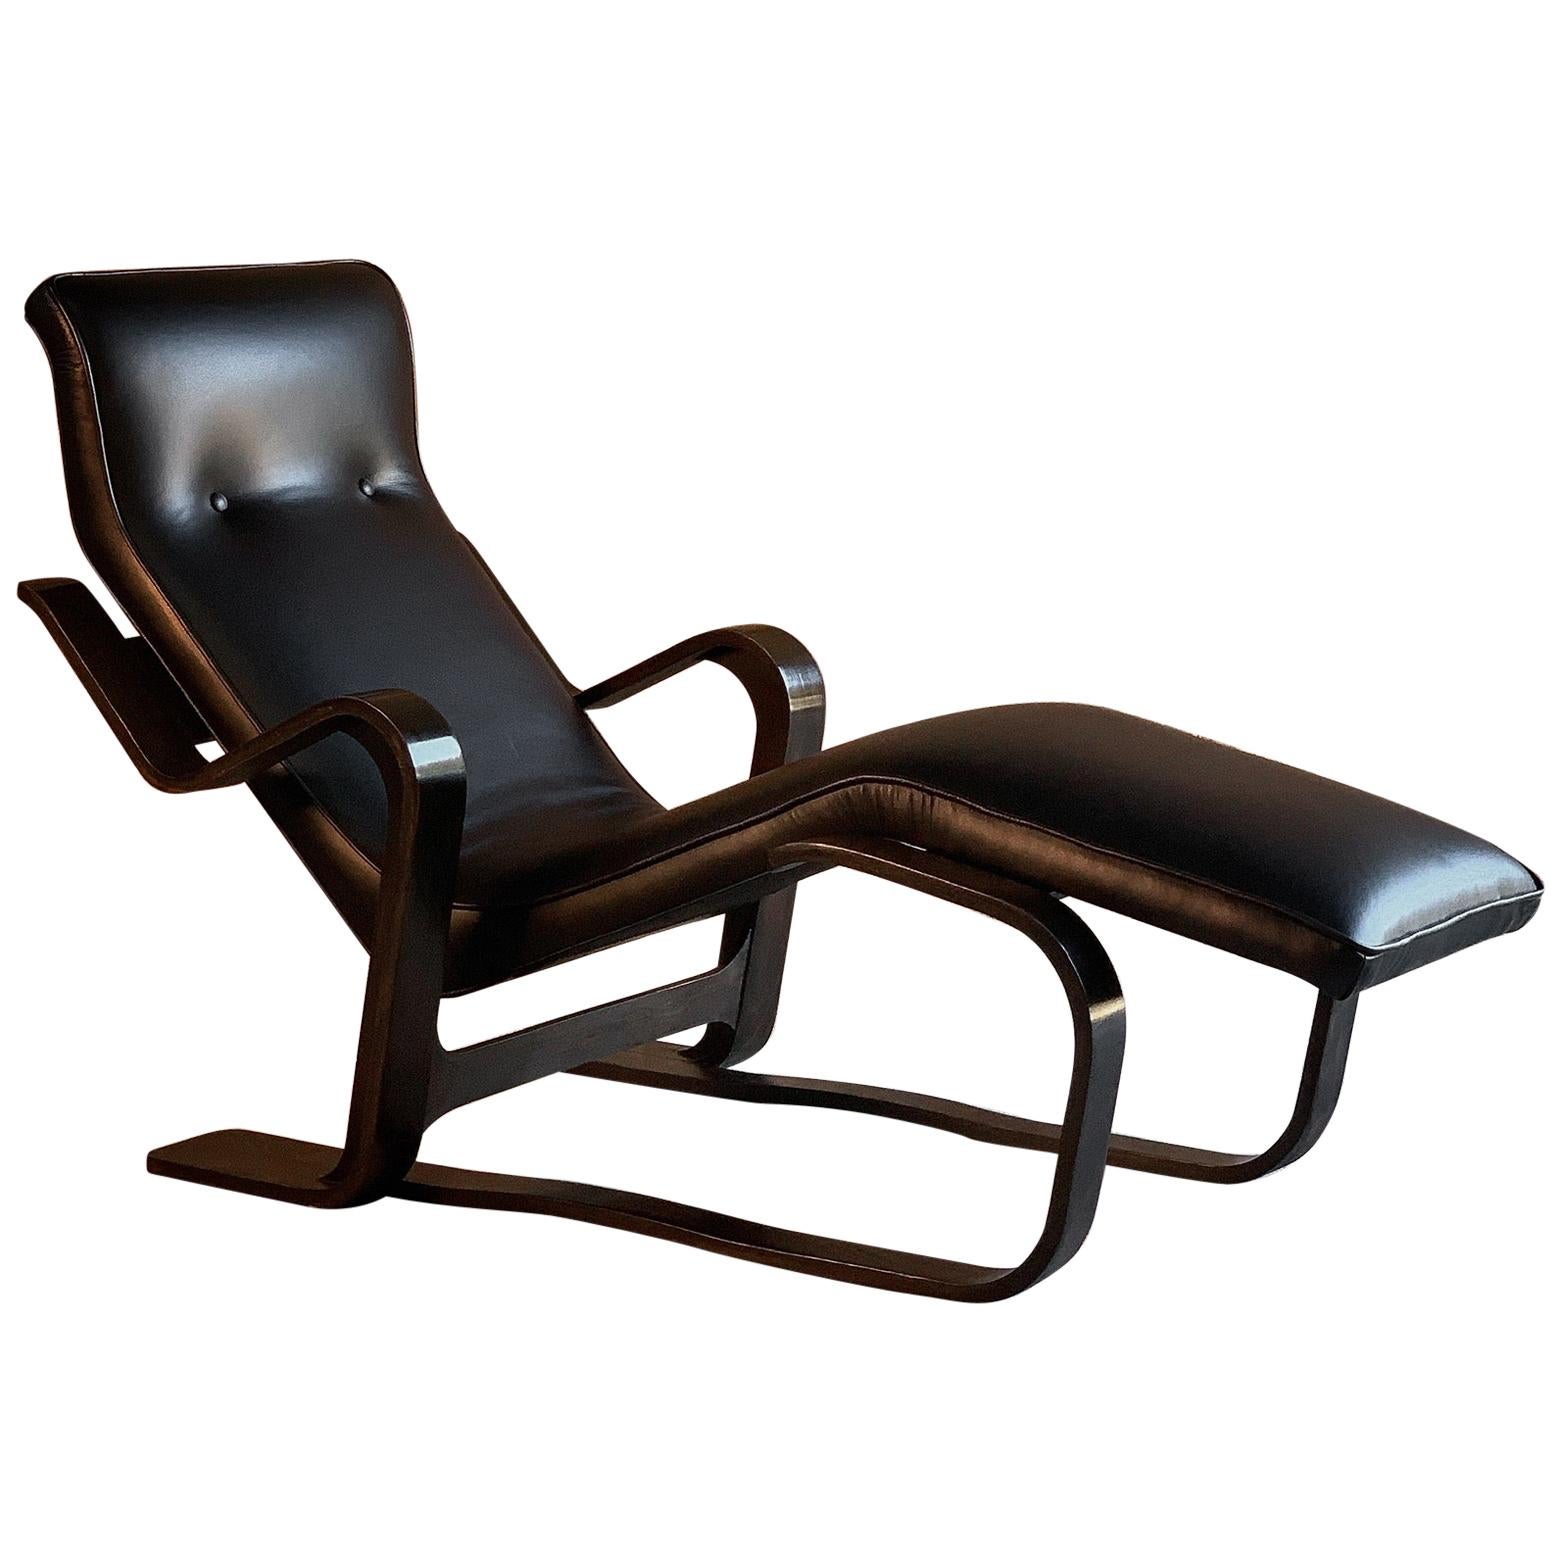 Marcel Breuer long chair chaise lounge attributed to Isokon, circa 1970 Bauhaus

Marcel Breuer 'Long Chair' ebonized bent ply with black leather seat pad by Isokon circa 1970s, the ‘Long chair’, with its bent frame of laminated birch wood supporting